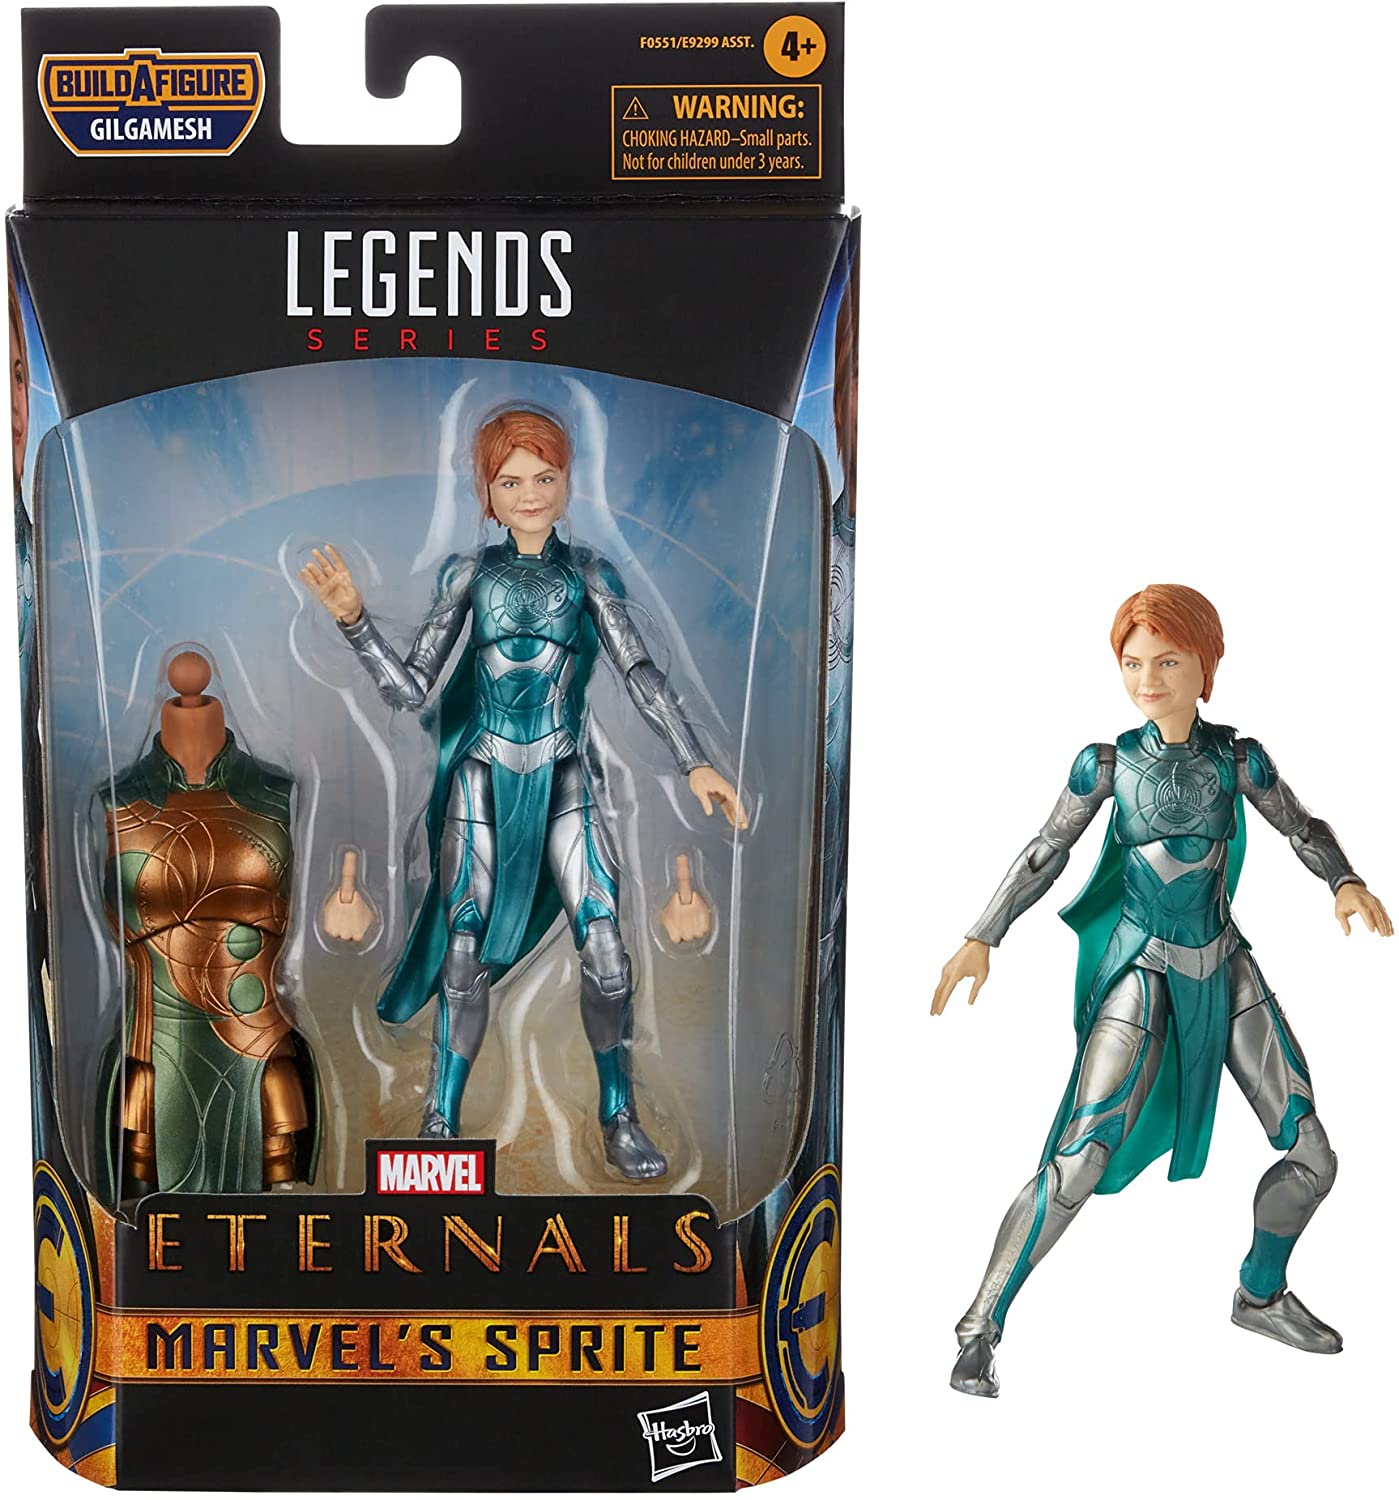 Marvel Legends X-Men '97 Wave 2 may have just spoiled two huge